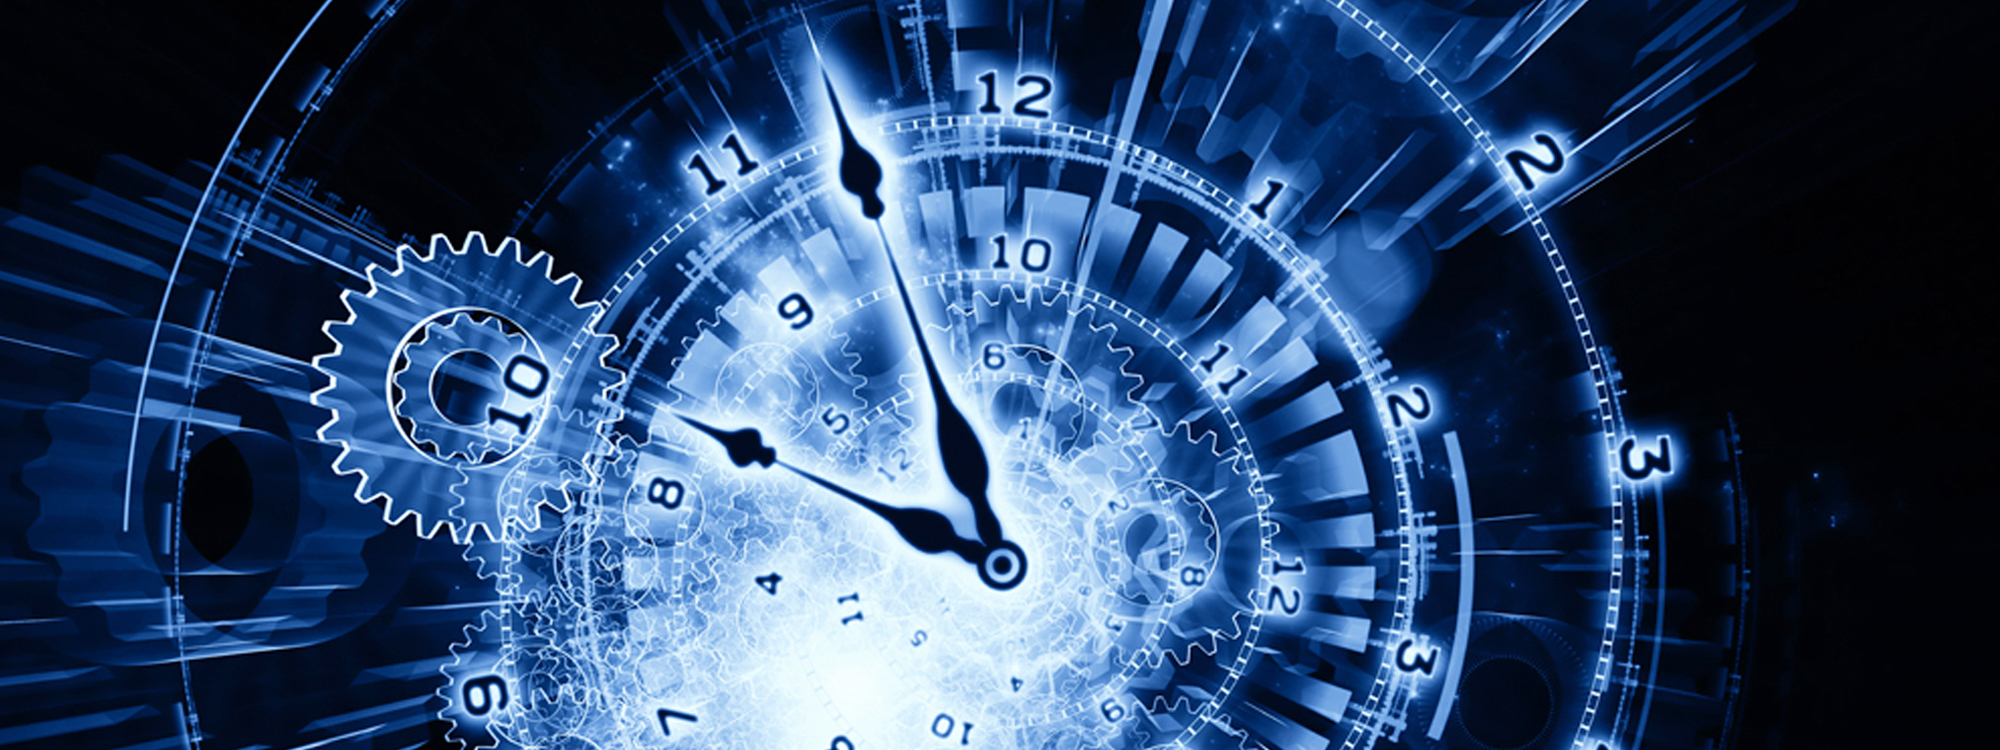 Time Travel Tips for Goal setting - By Bev James